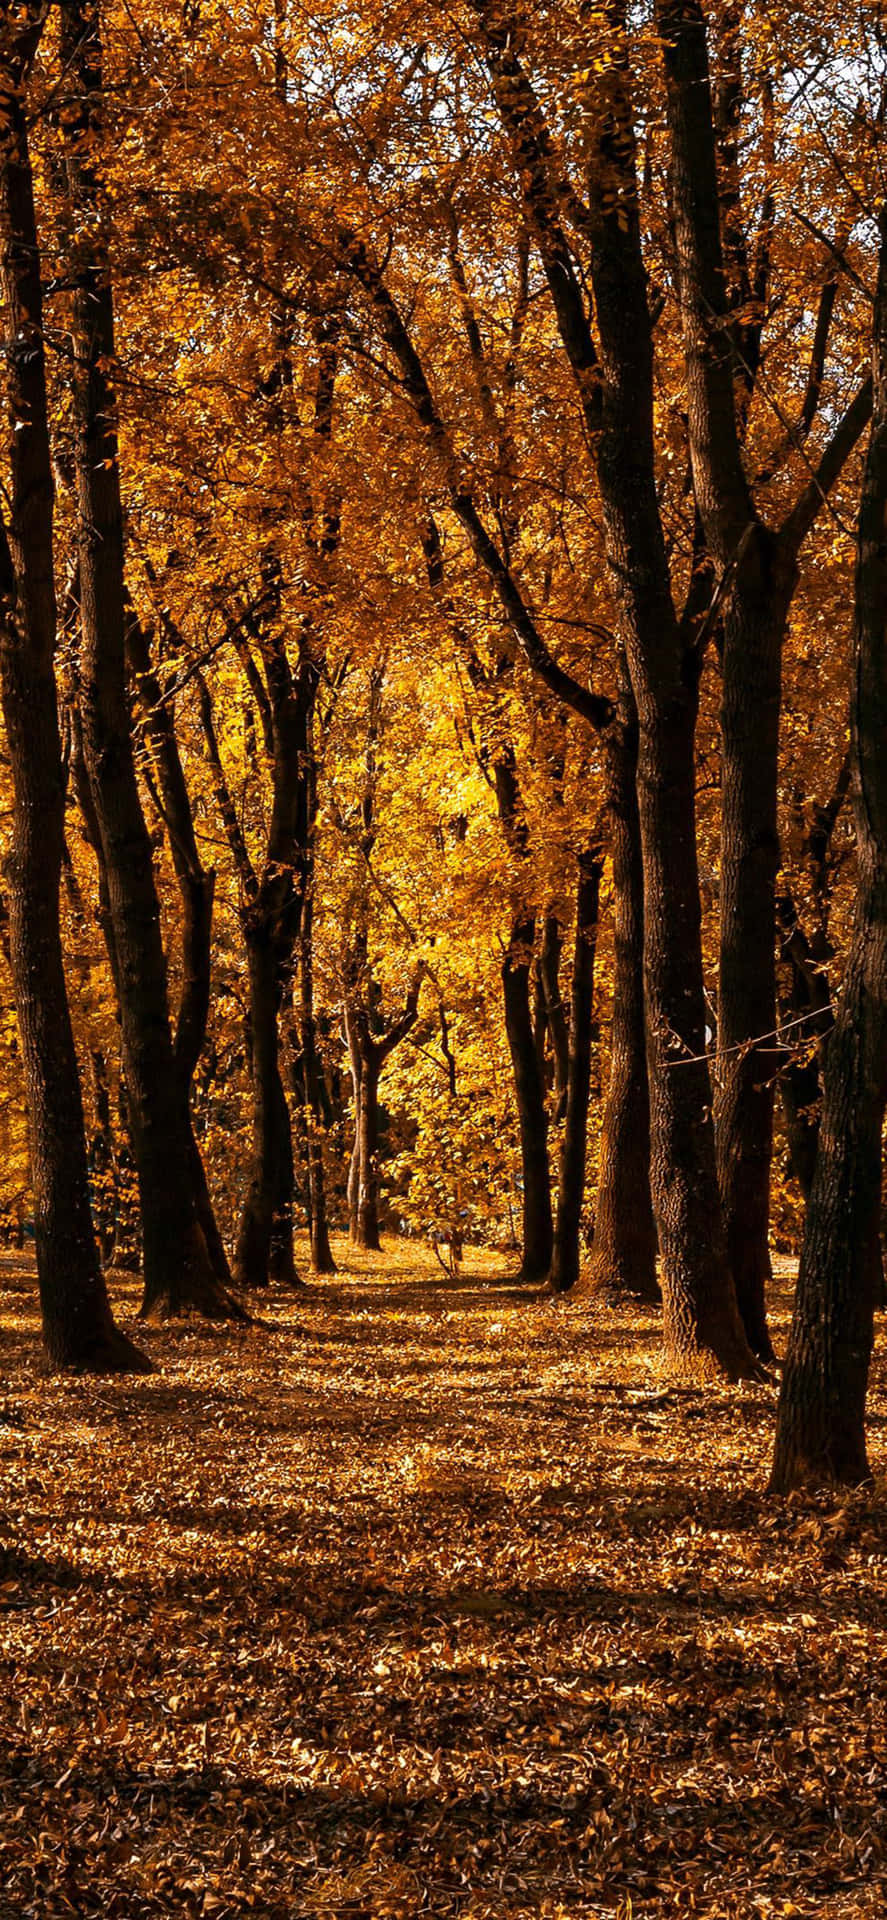 A Path In The Woods With Yellow Leaves